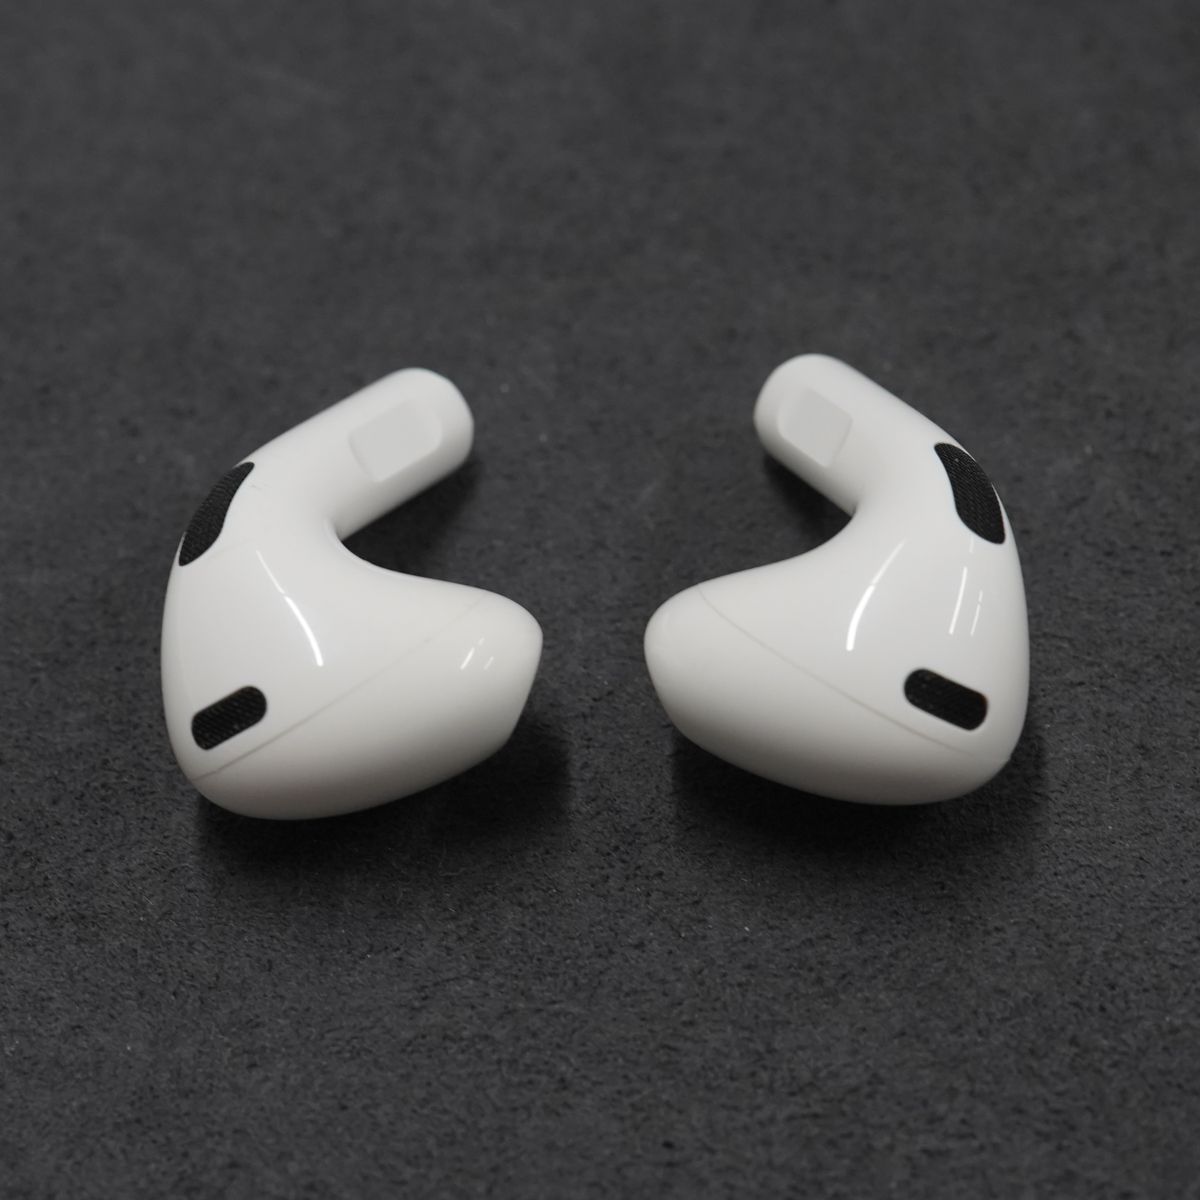 Apple AirPods 第三世代 MagSafe充電ケース付 USED超美品 ワイヤレス